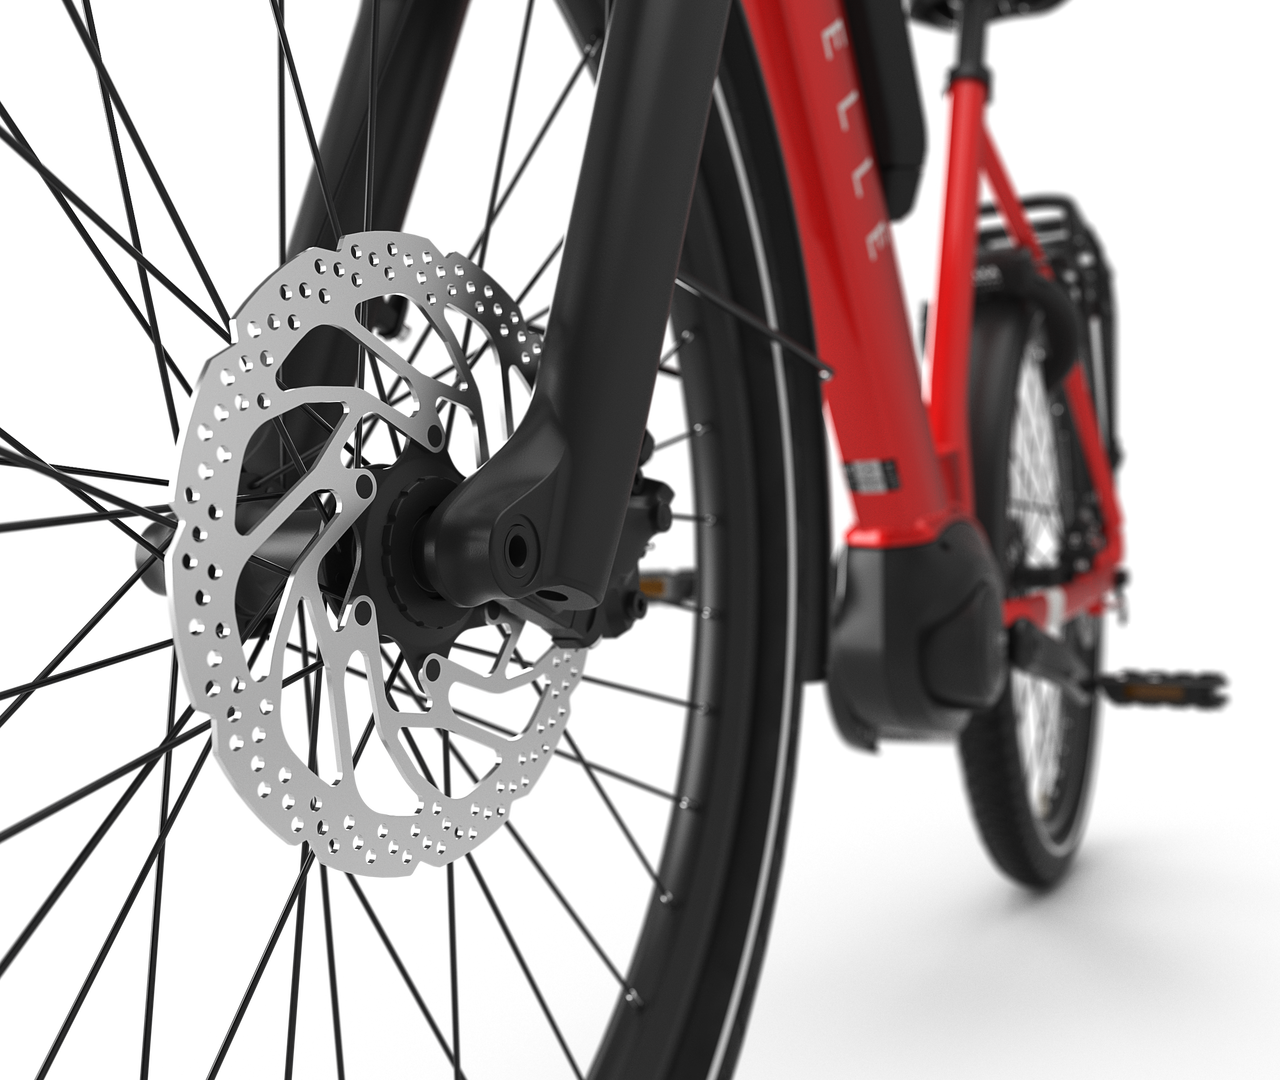 Powerful and controlled braking Gazelle Medeo T9 HMB E-bike low-step champion red